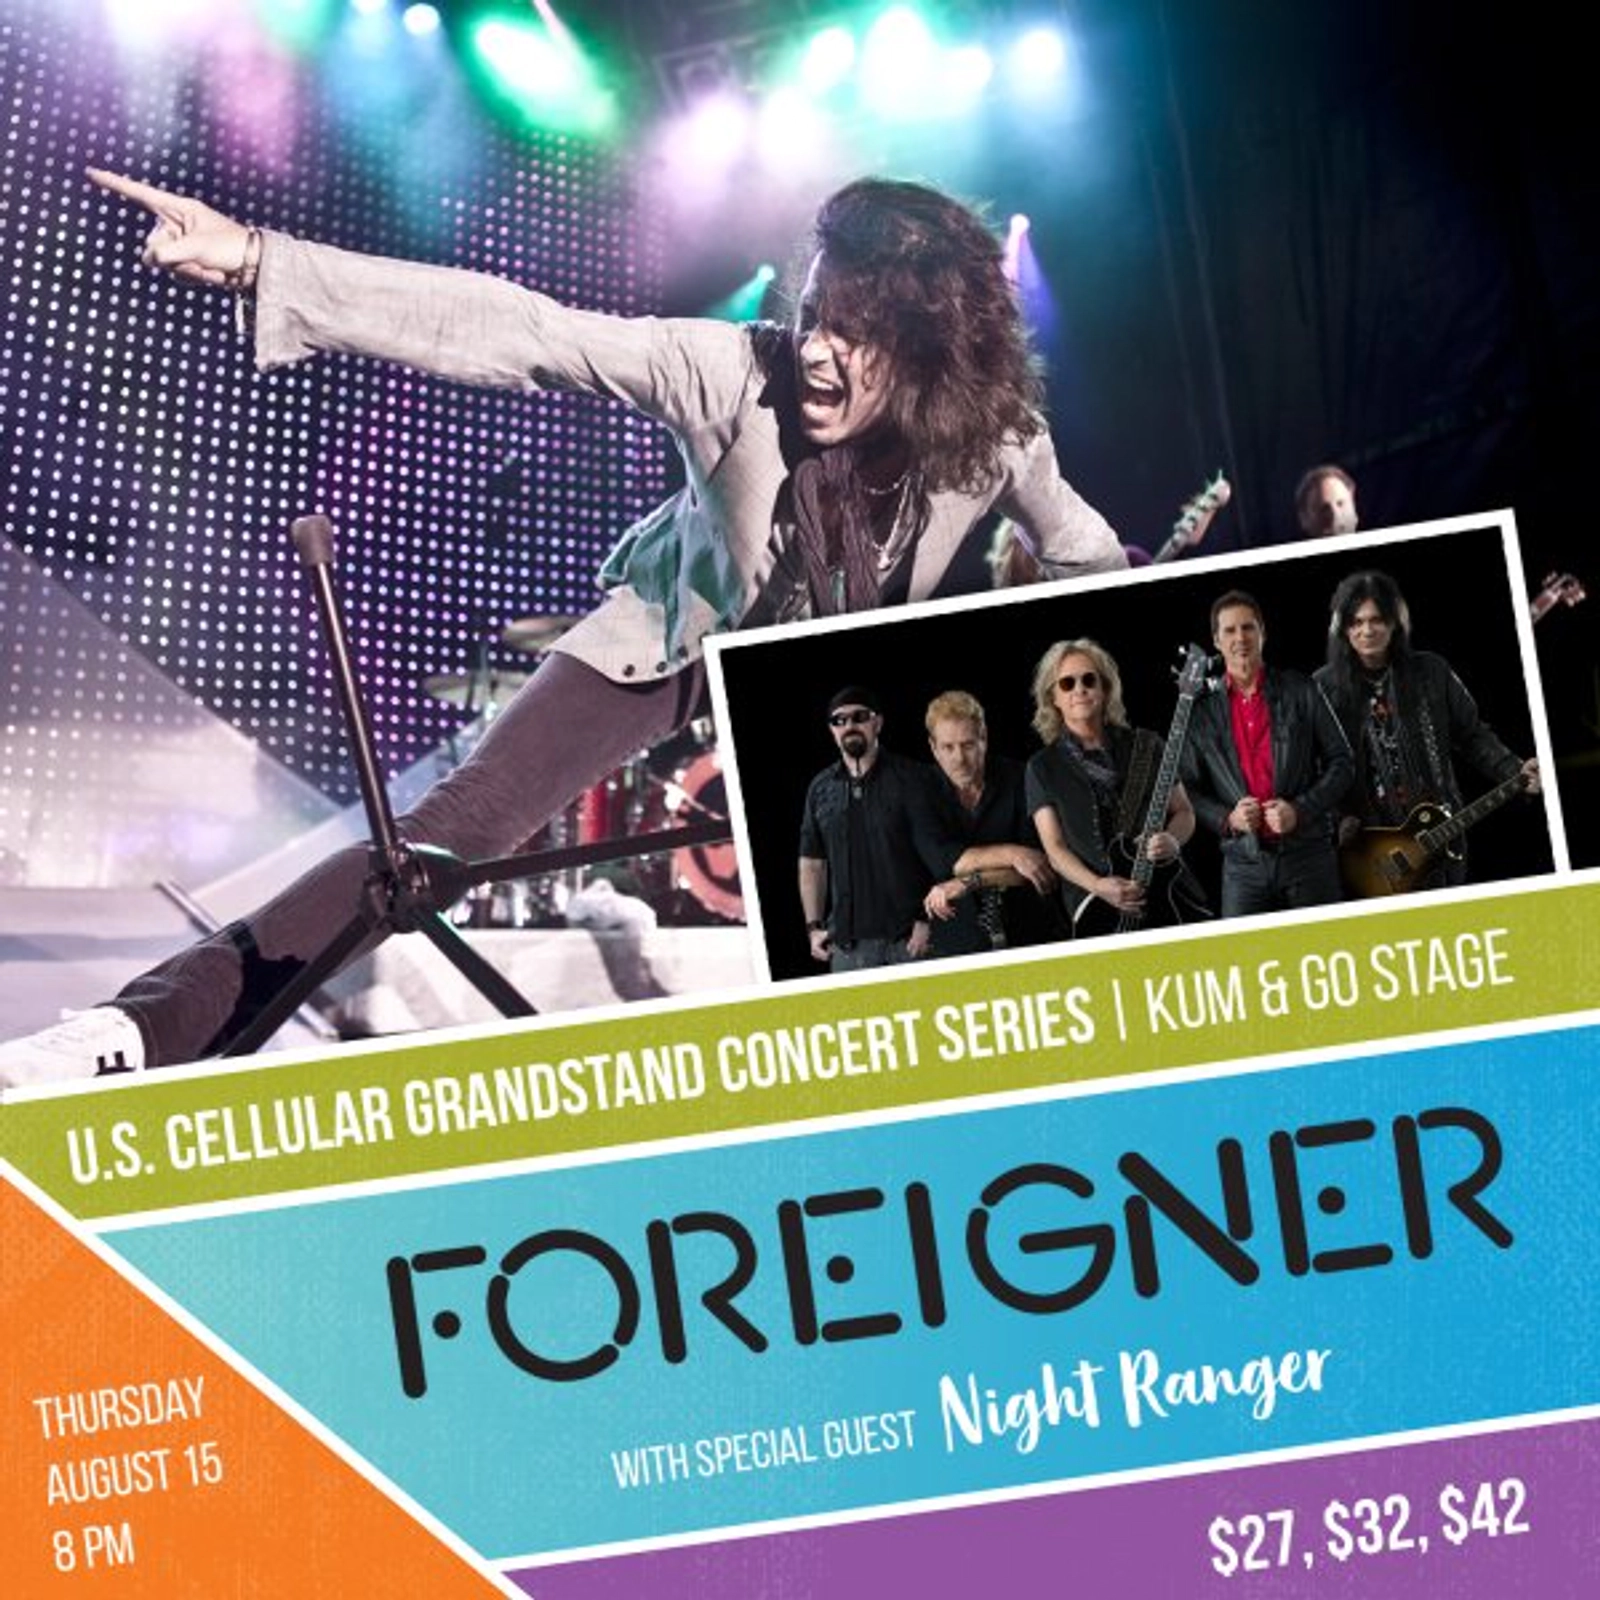  Win FOREIGNER/NIGHT RANGER Tix in THE BUS BOX OFFICE - Thumbnail Image